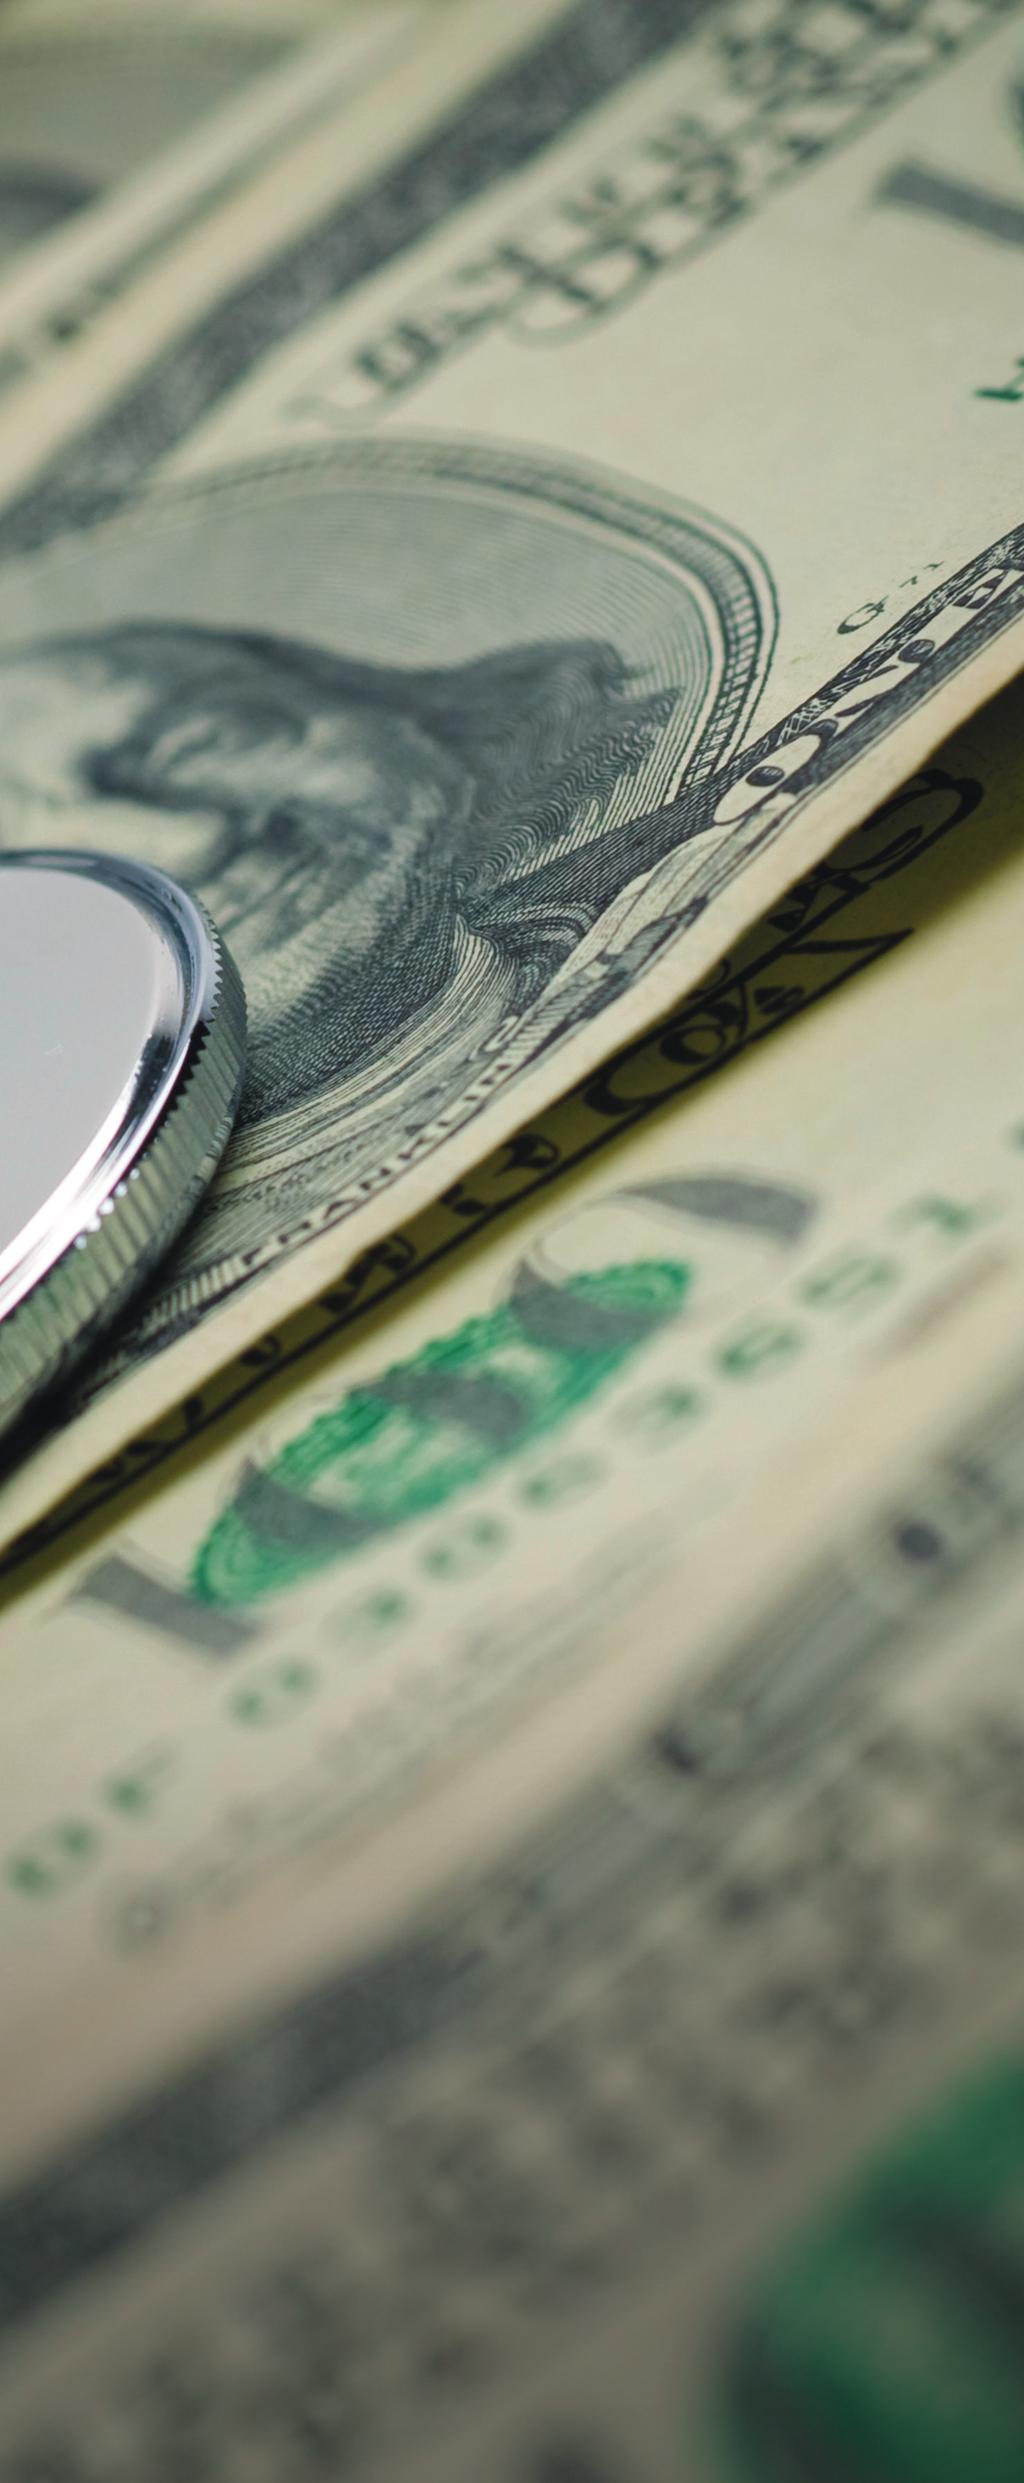 Pricing transparency is becoming a hot topic by Carolyn C. Shadle, PhD, and John L. Meyer, PhD ONE OF THE HOTTEST TOPICS IN HEALTH CARE right now is pricing transparency.